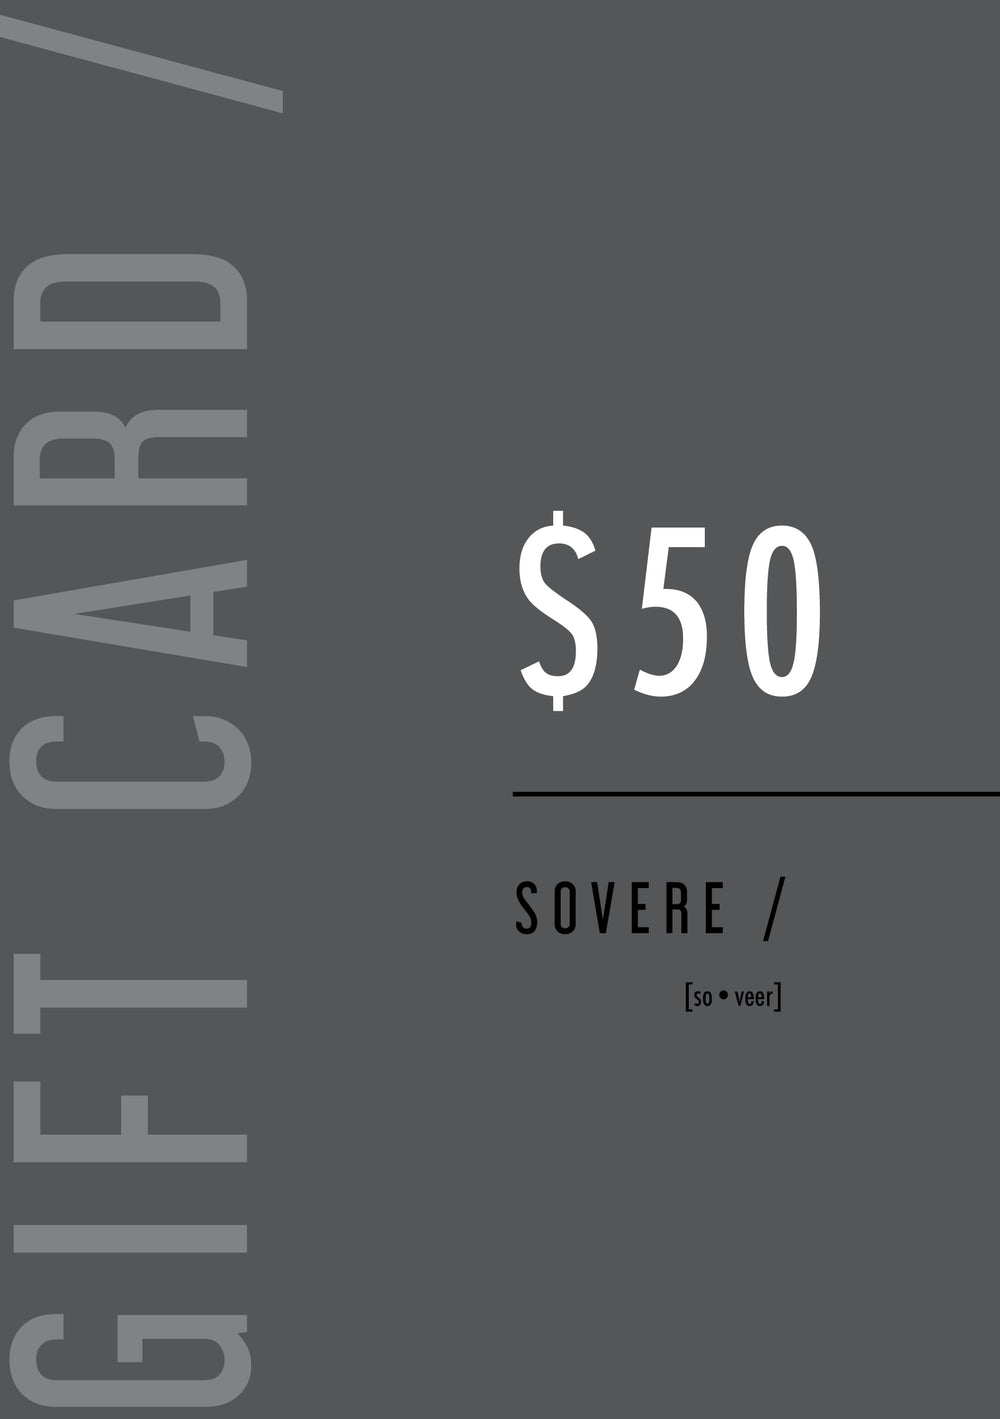 SOVERE / GIFT CARD